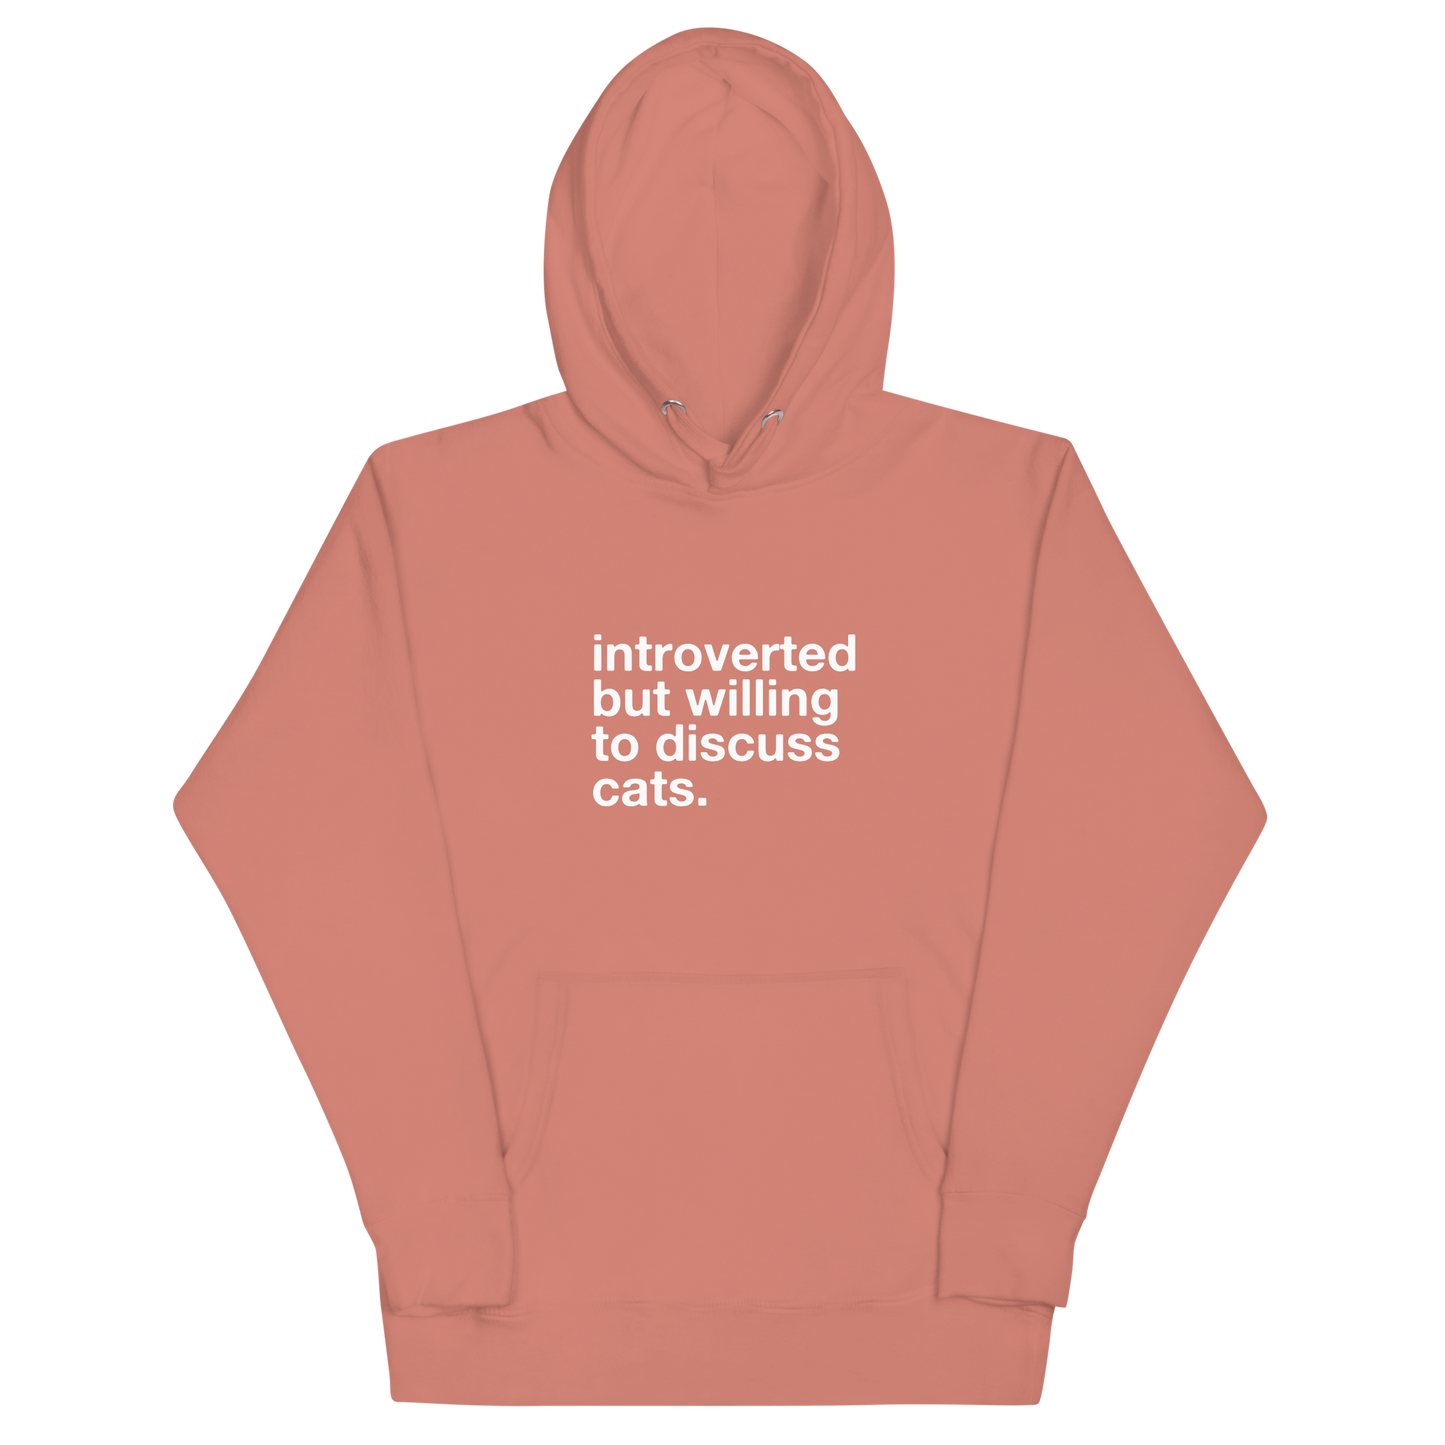 introverted but willing to discuss cats. - Unisex Premium Hoodie